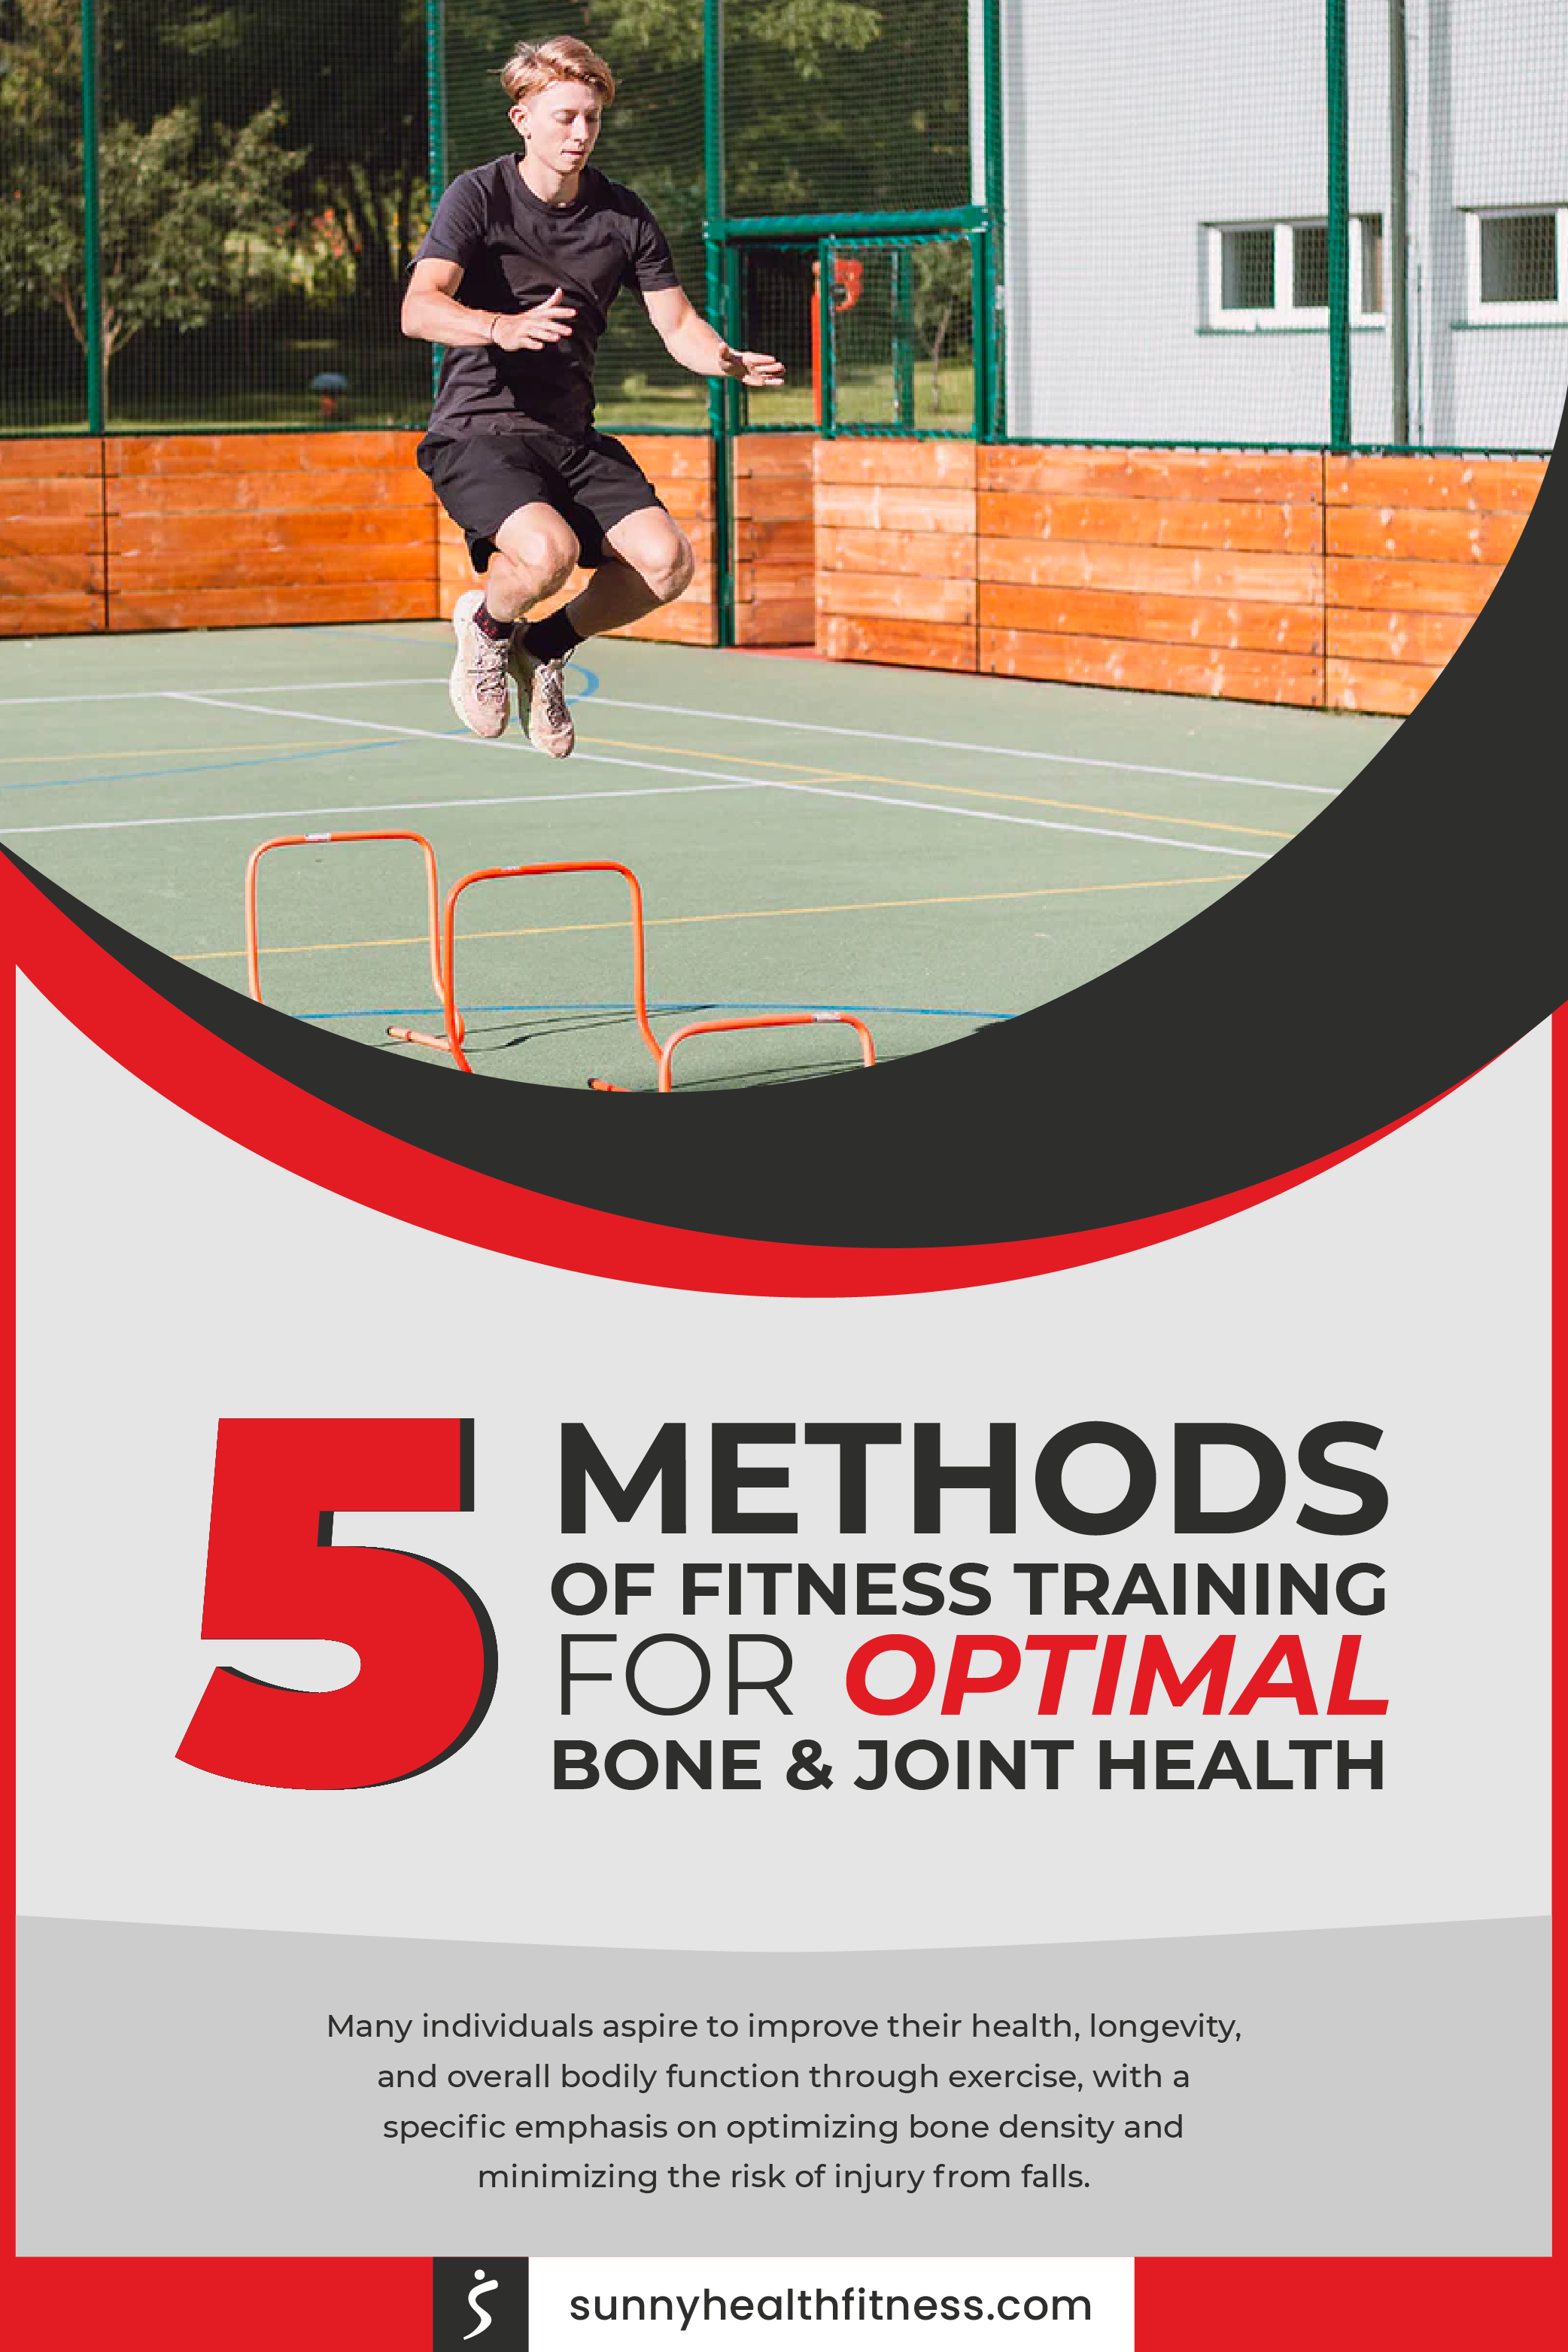 Fitness Training for Optimal Bone and Joint Health